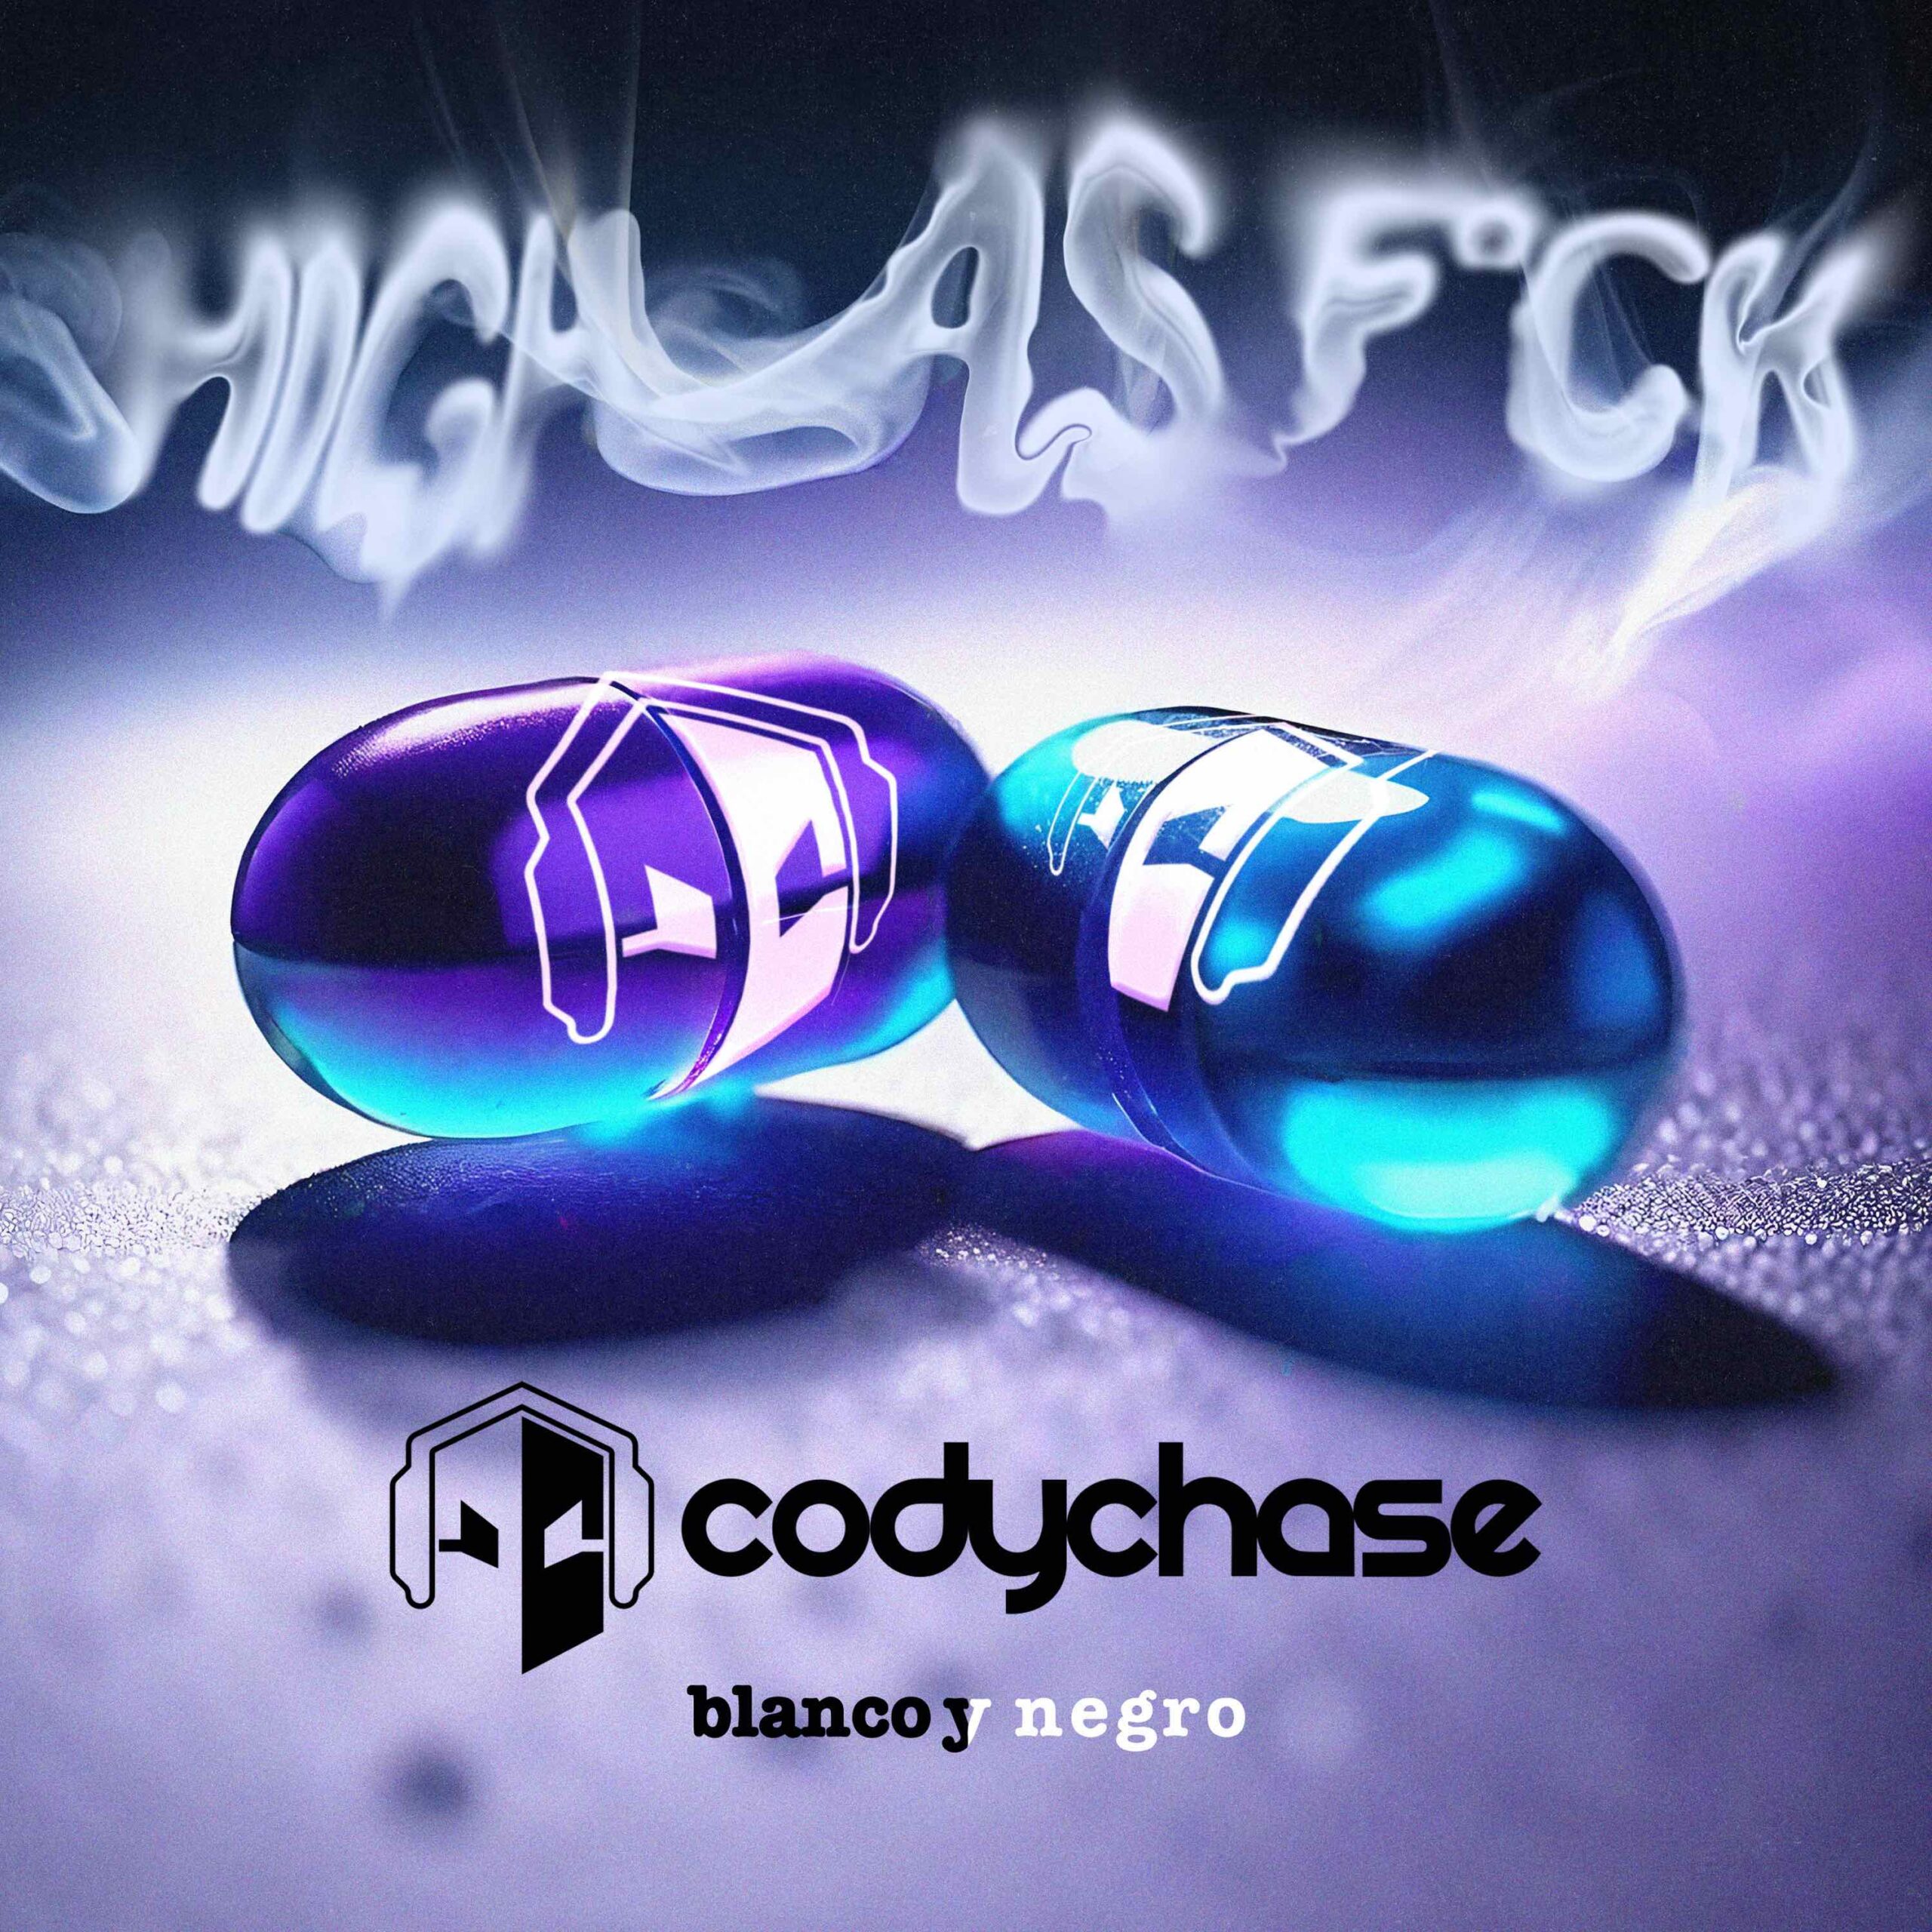 Cody Chase Invites Listeners into a Hypnotically Groovy Soundscape with 'High As F*ck'